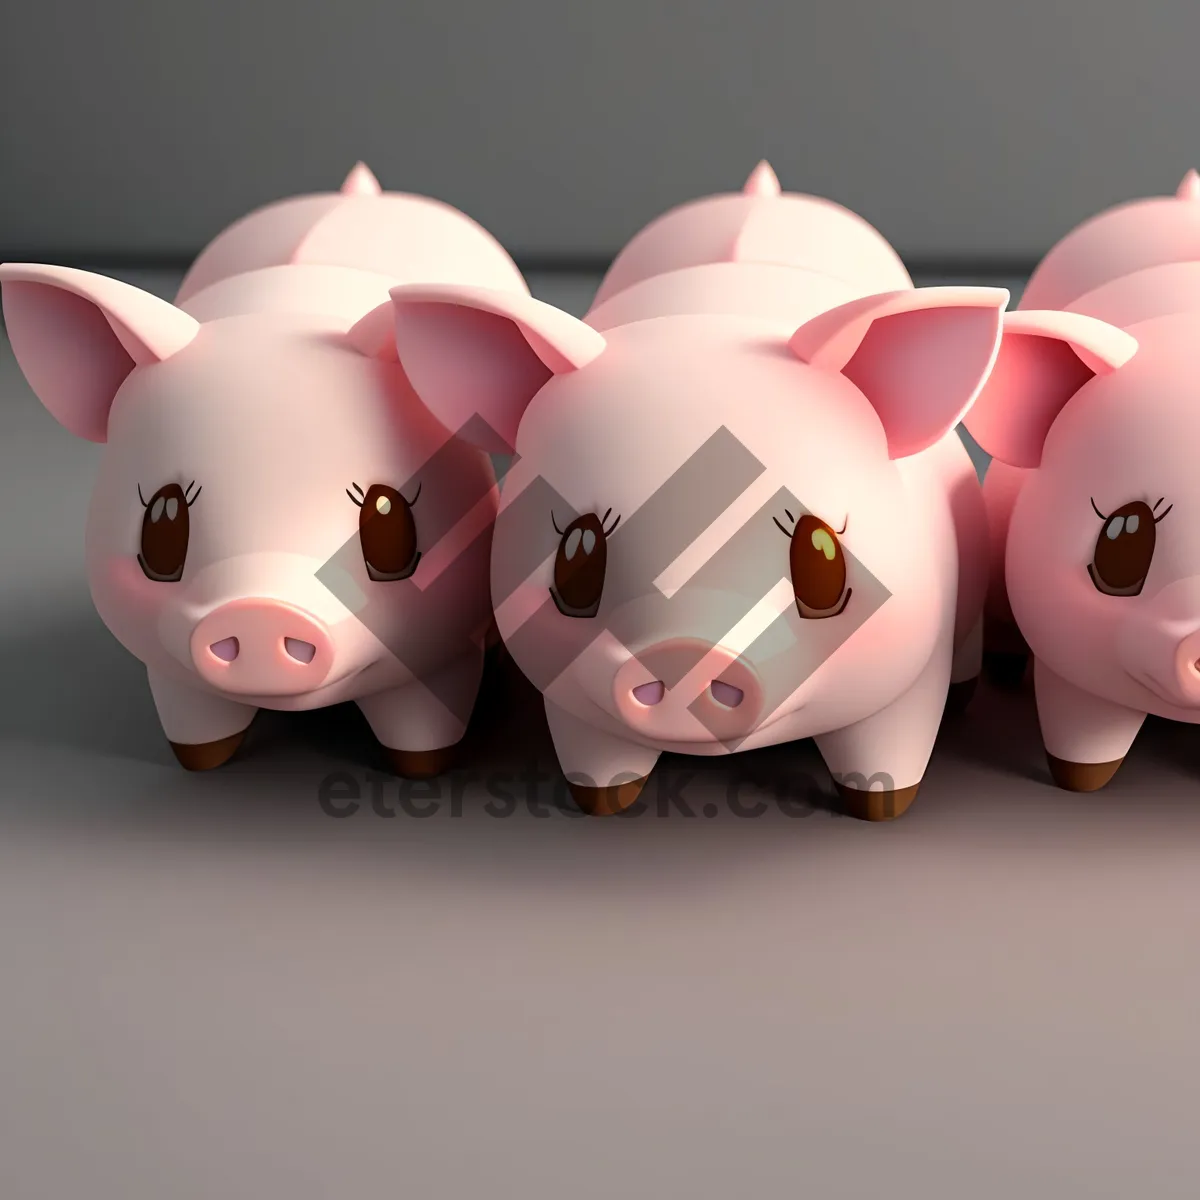 Picture of Ceramic piggy bank with money and coins.